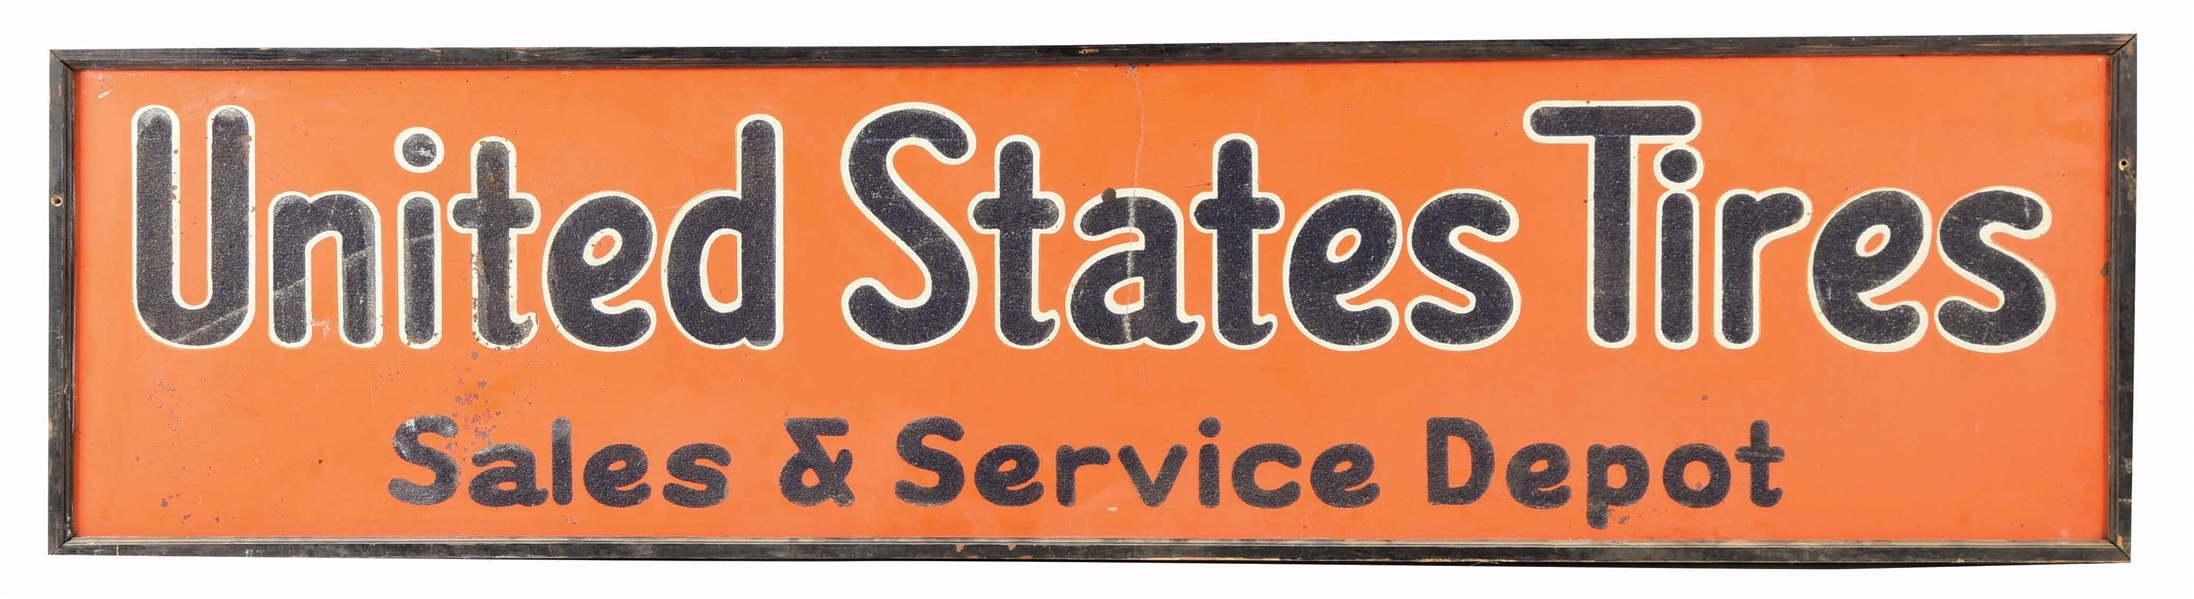 UNITED STATES TIRES SALES & SERVICE DEPOT TIN SMALTS PAINTED SIGN W/ ORIGINAL WOOD FRAME. 